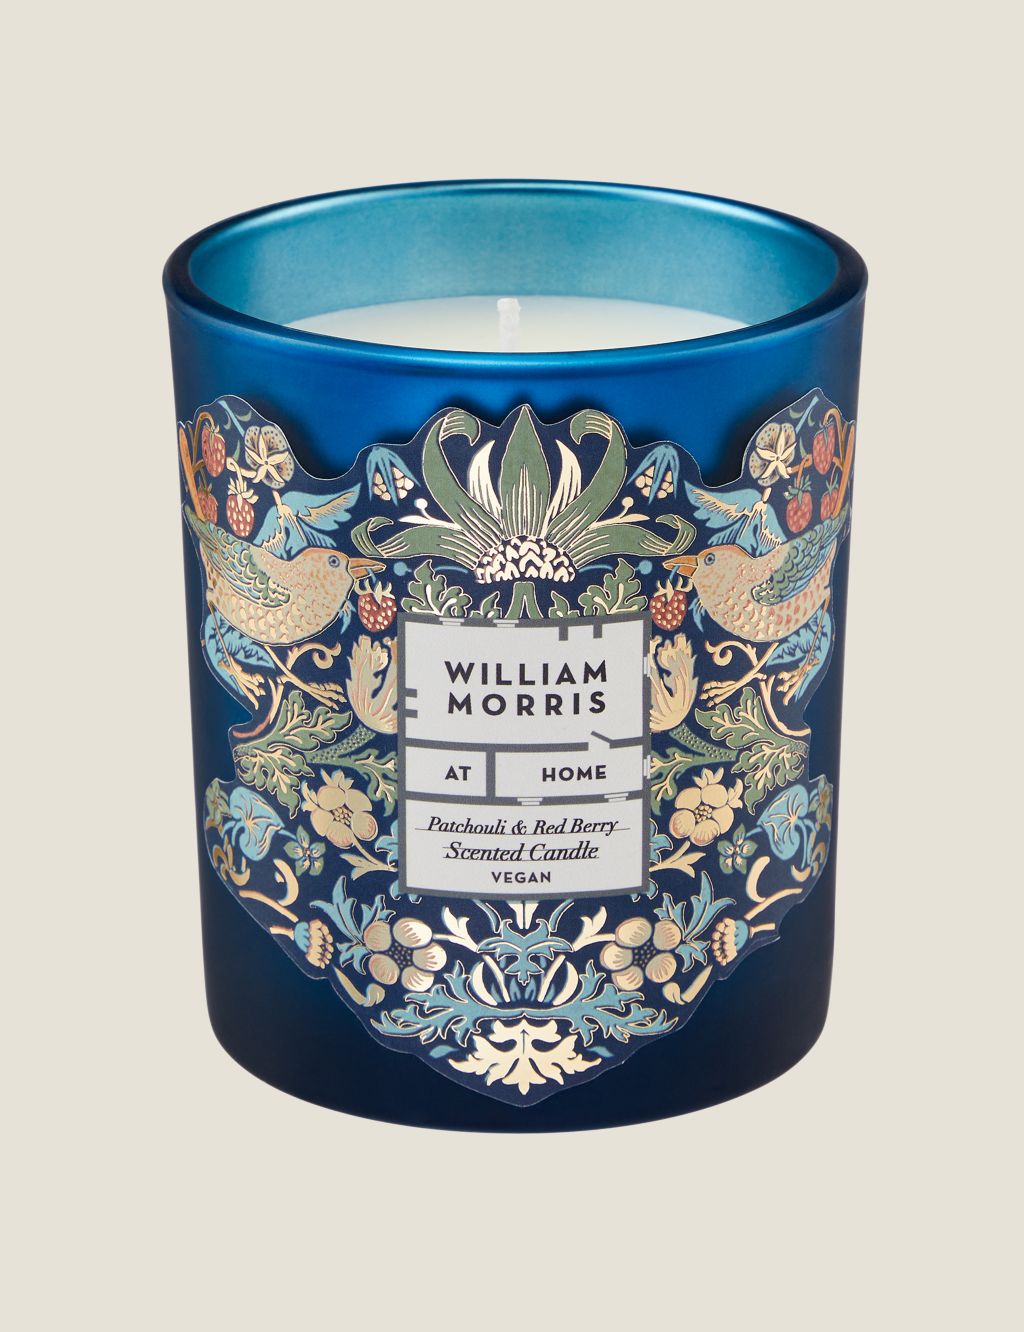 William Morris At Home Scented Candle image 1